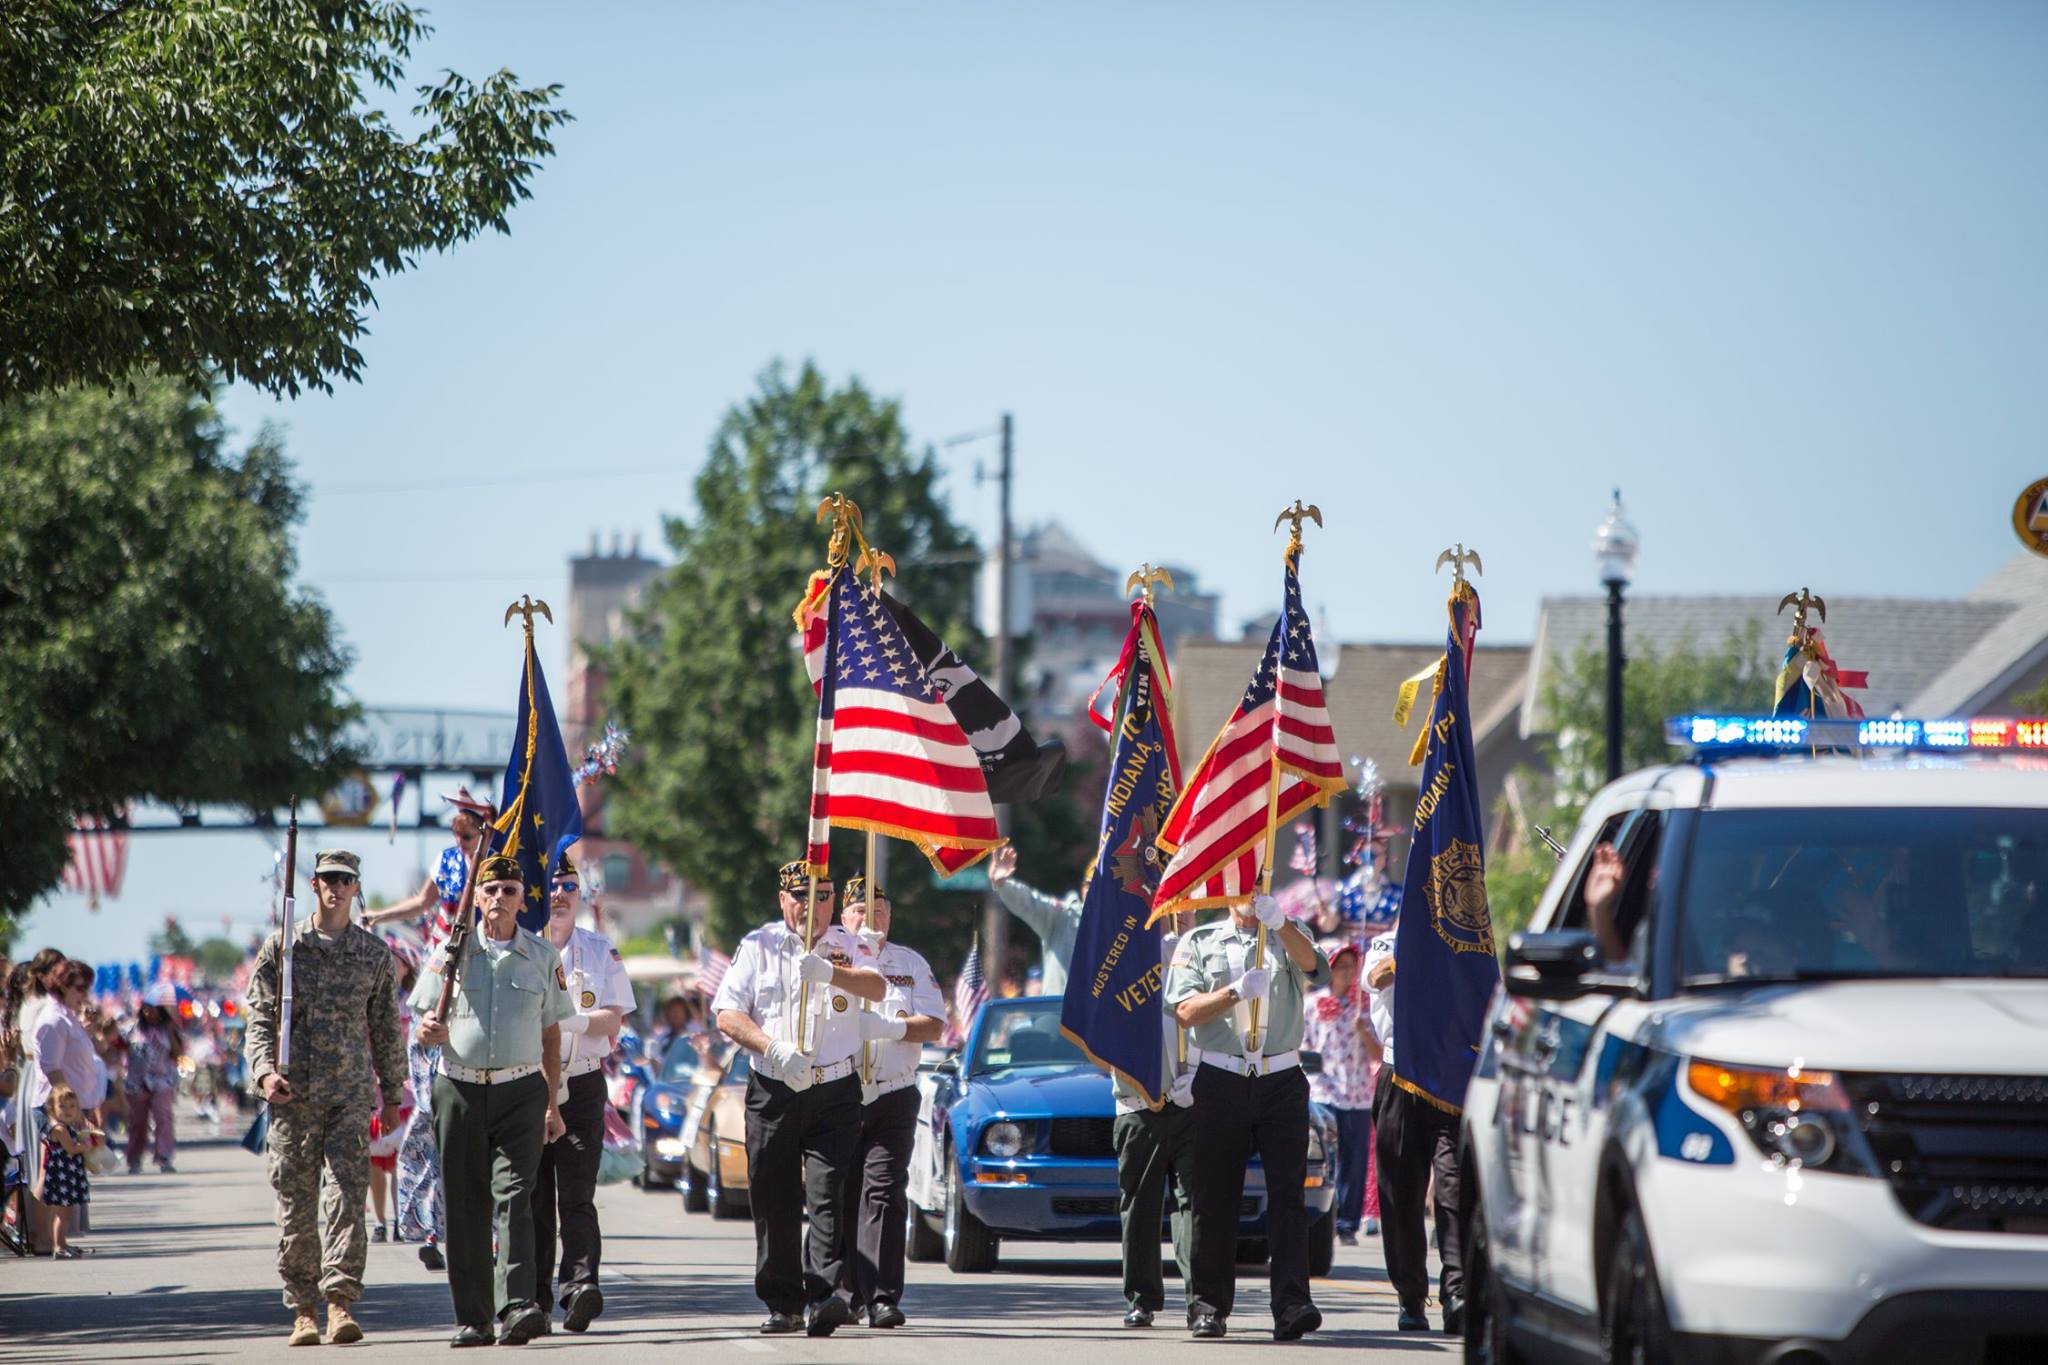 CarmelFest continues with parade, fireworks